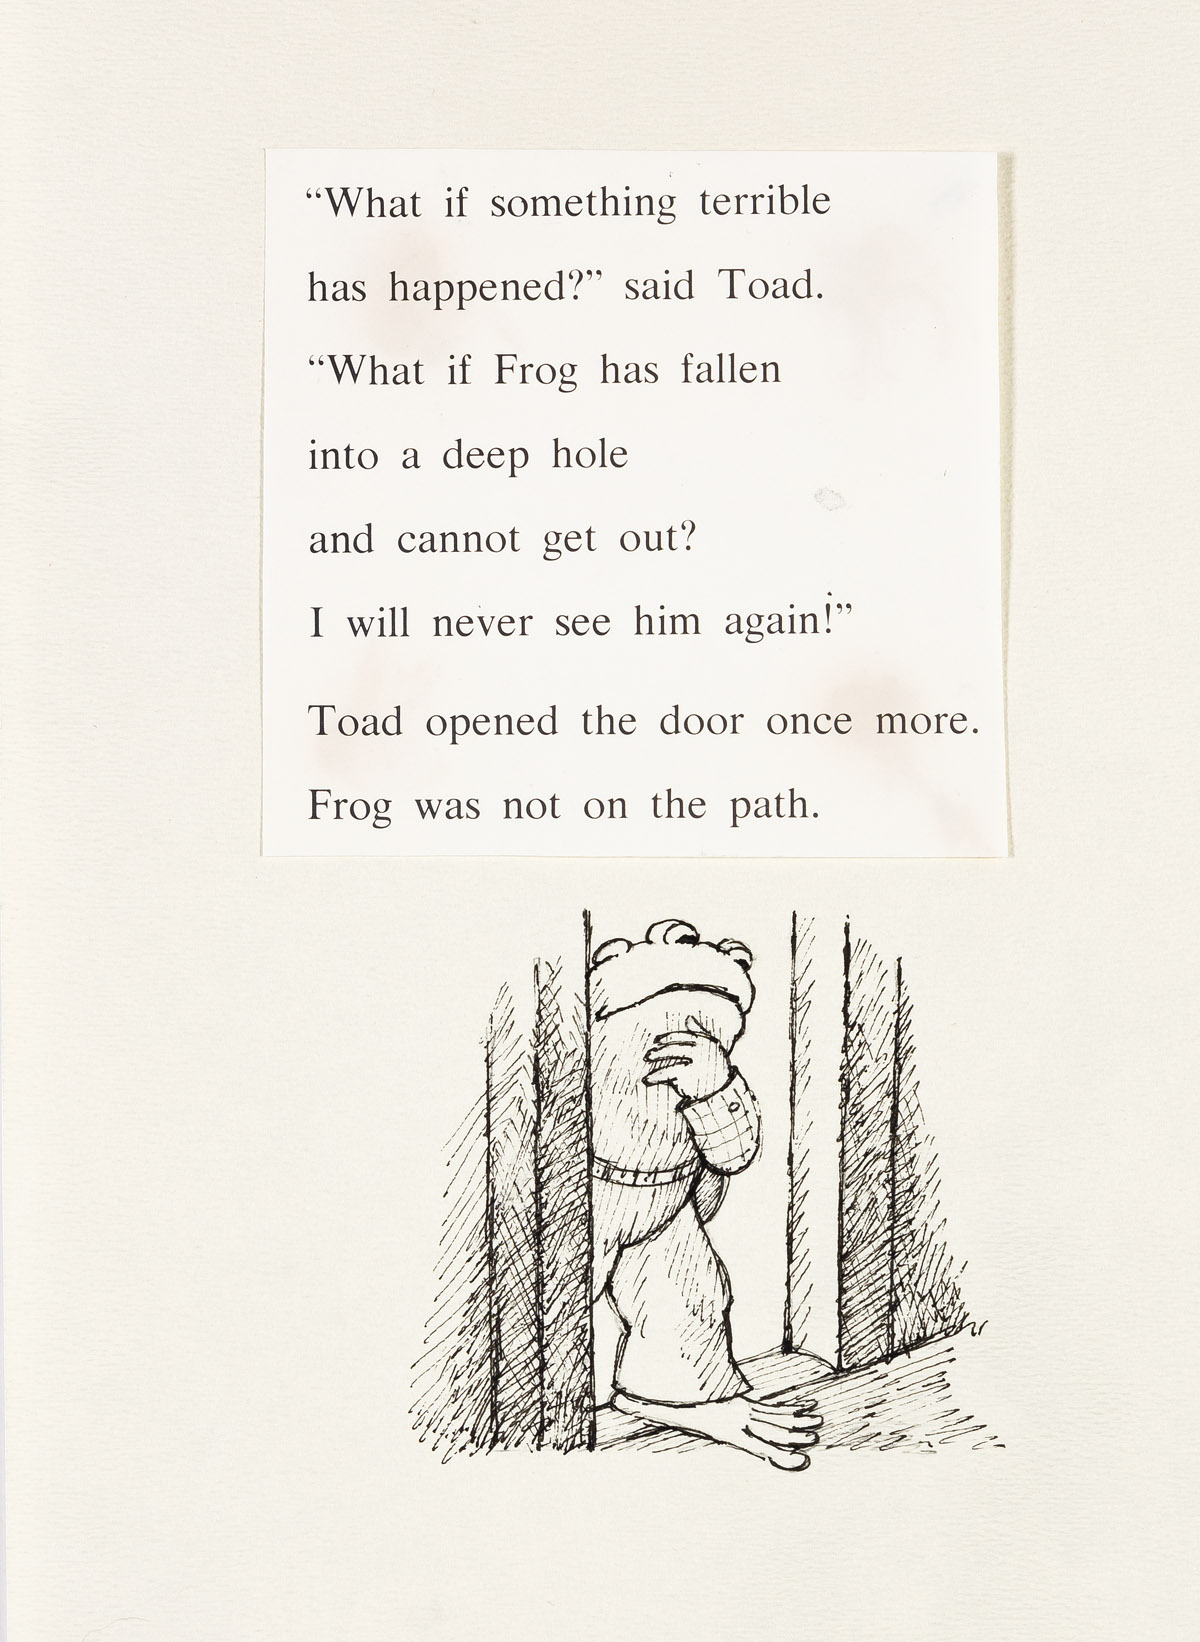 ARNOLD LOBEL (1933-1987) What if Frog has fallen into a deep hole and cannot get out? * Toad opened the door once more but Frog was